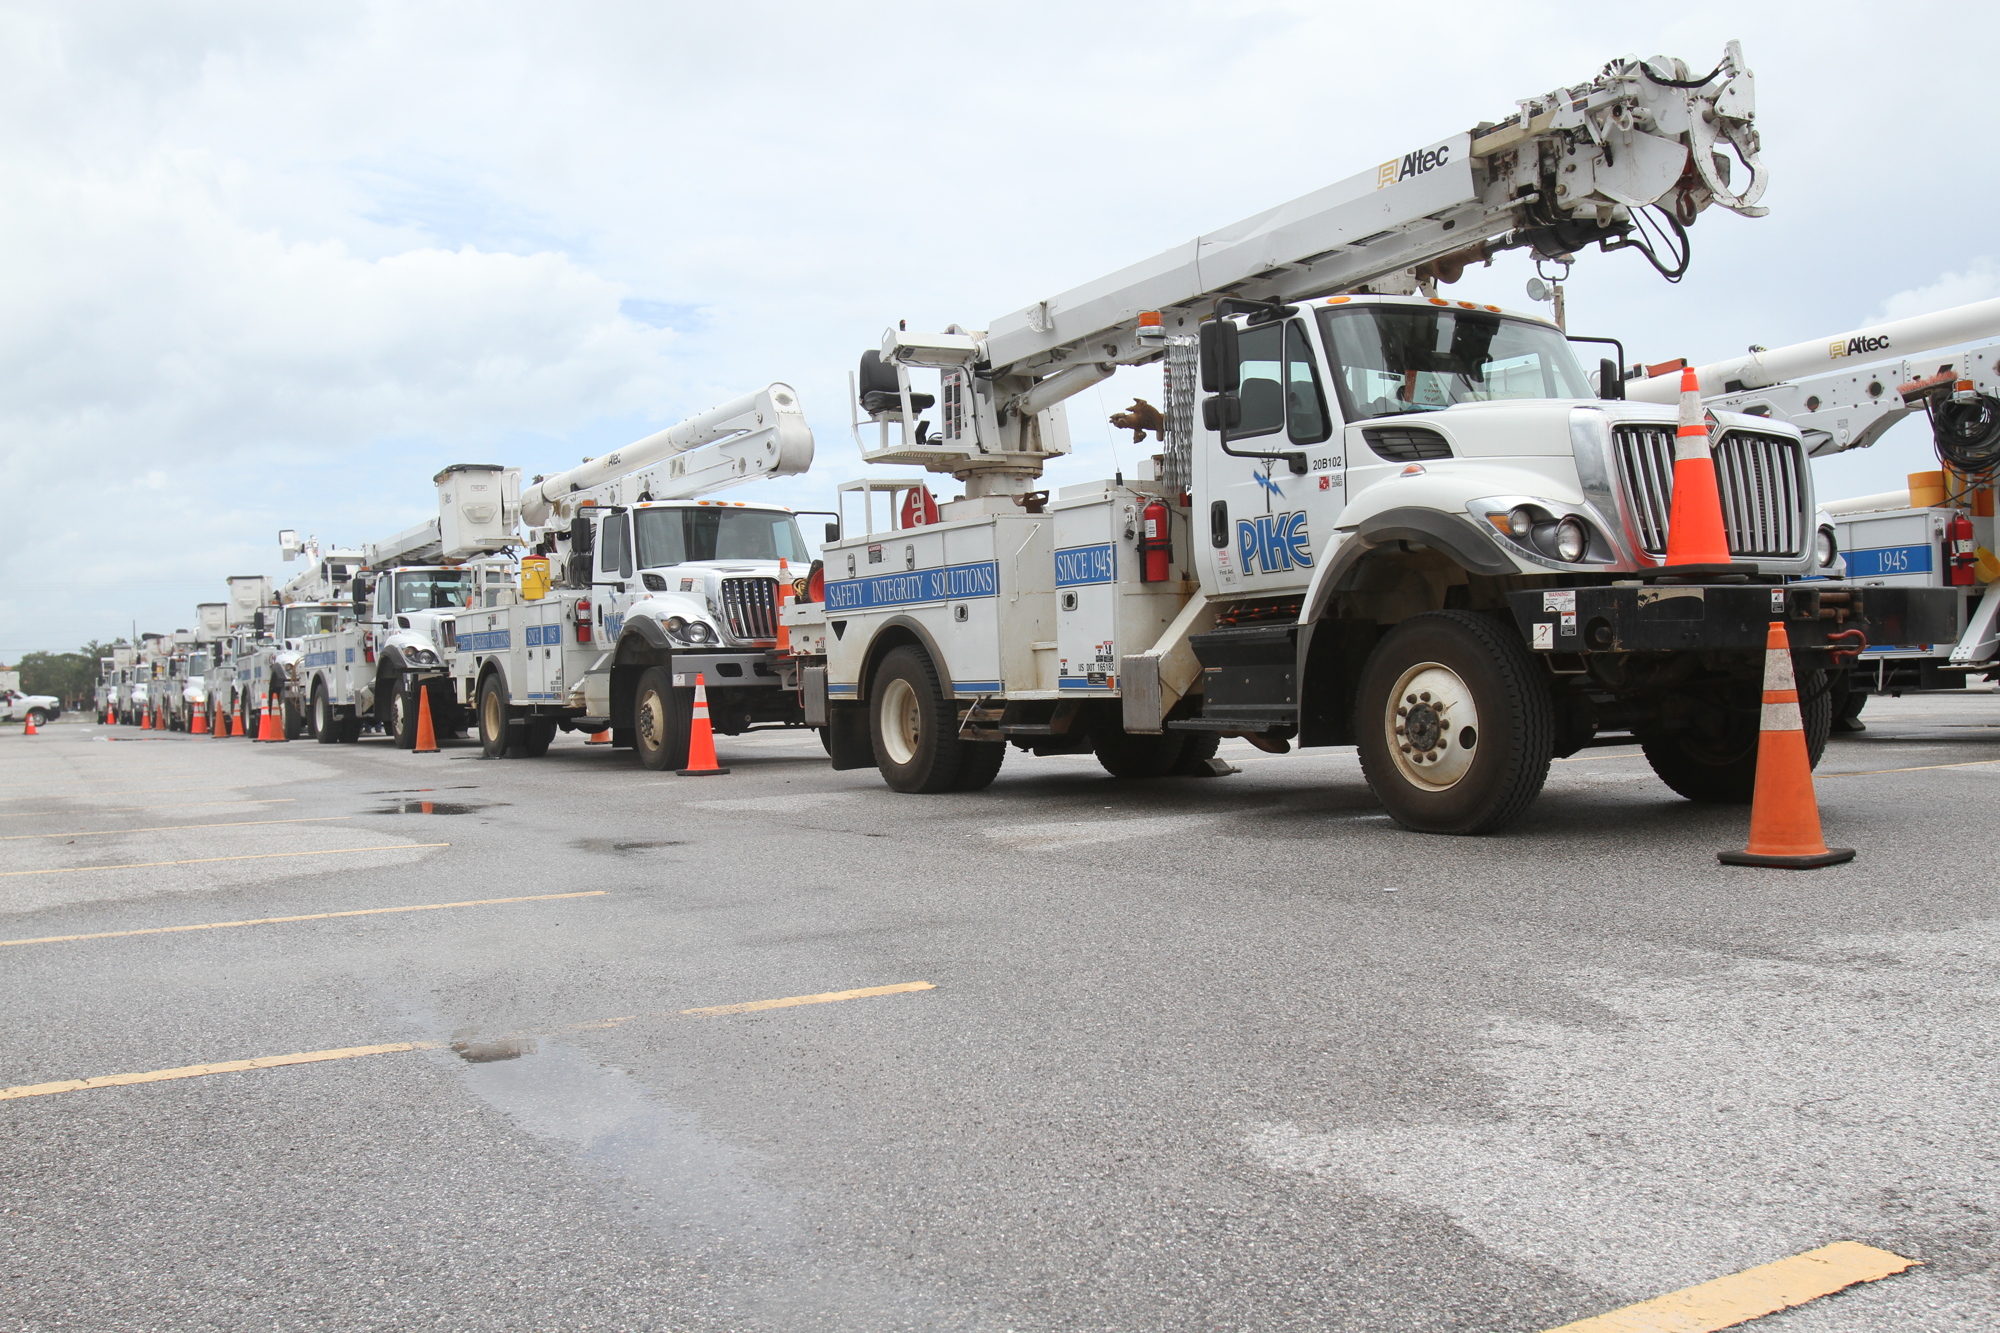 Power crews staging at the Sarasota Fairgrounds were ready to roll.